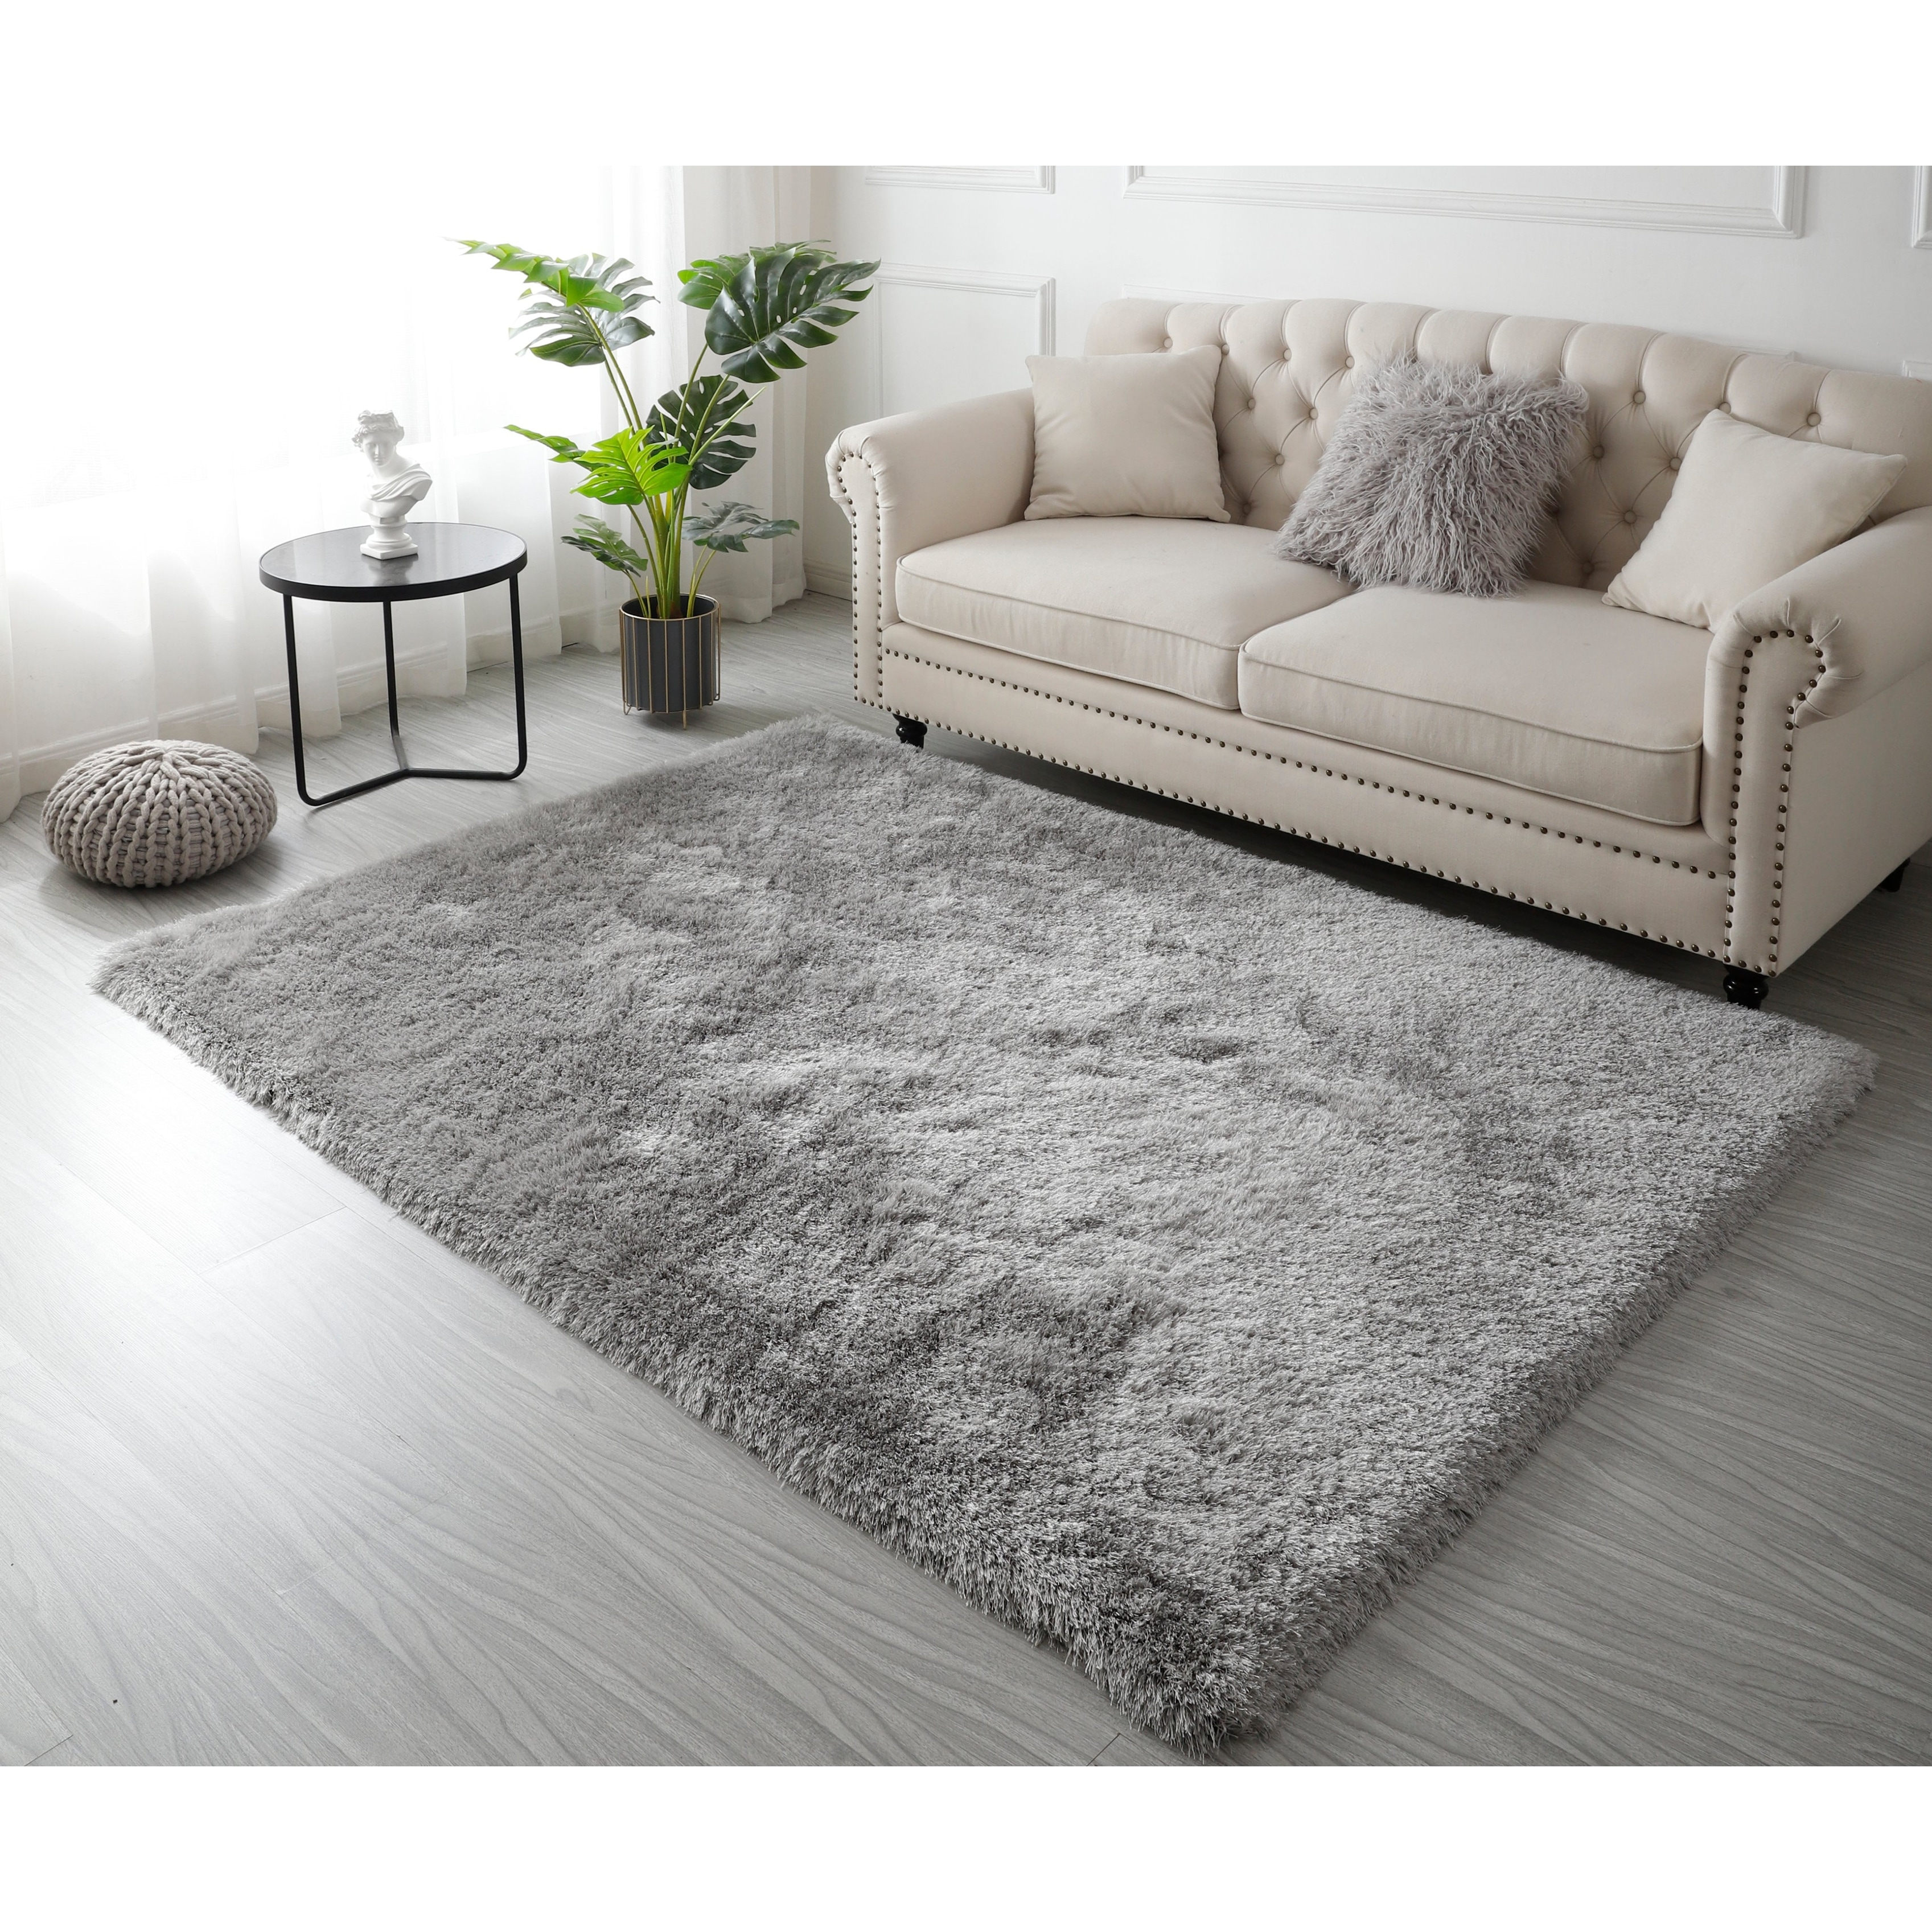 Thick Quality 20mm Modern Design Densely very Soft Rugs SHADOW 8595 vizon white 